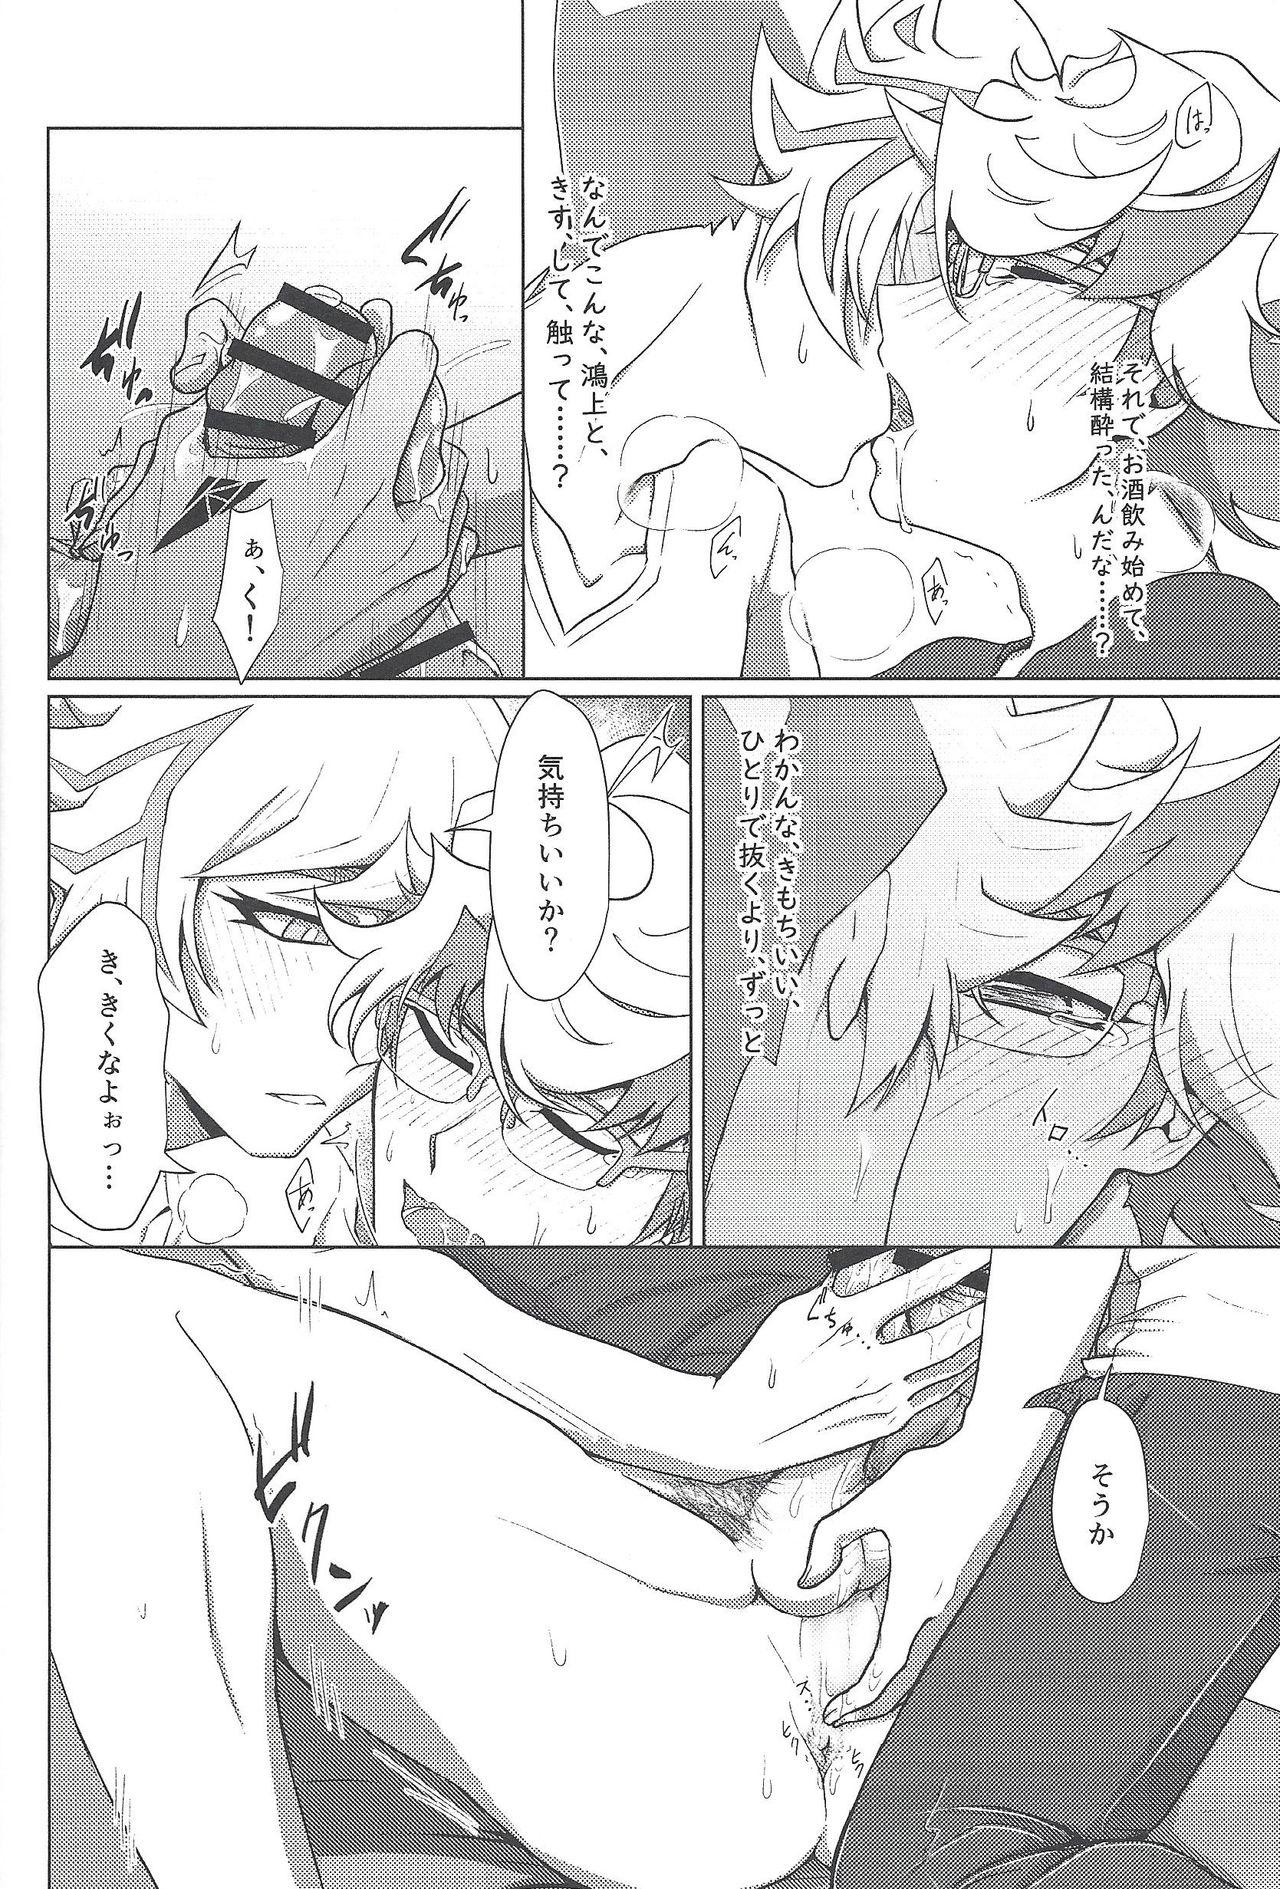 Pee Meitei Sex no Susume - Yu-gi-oh vrains Publico - Page 5